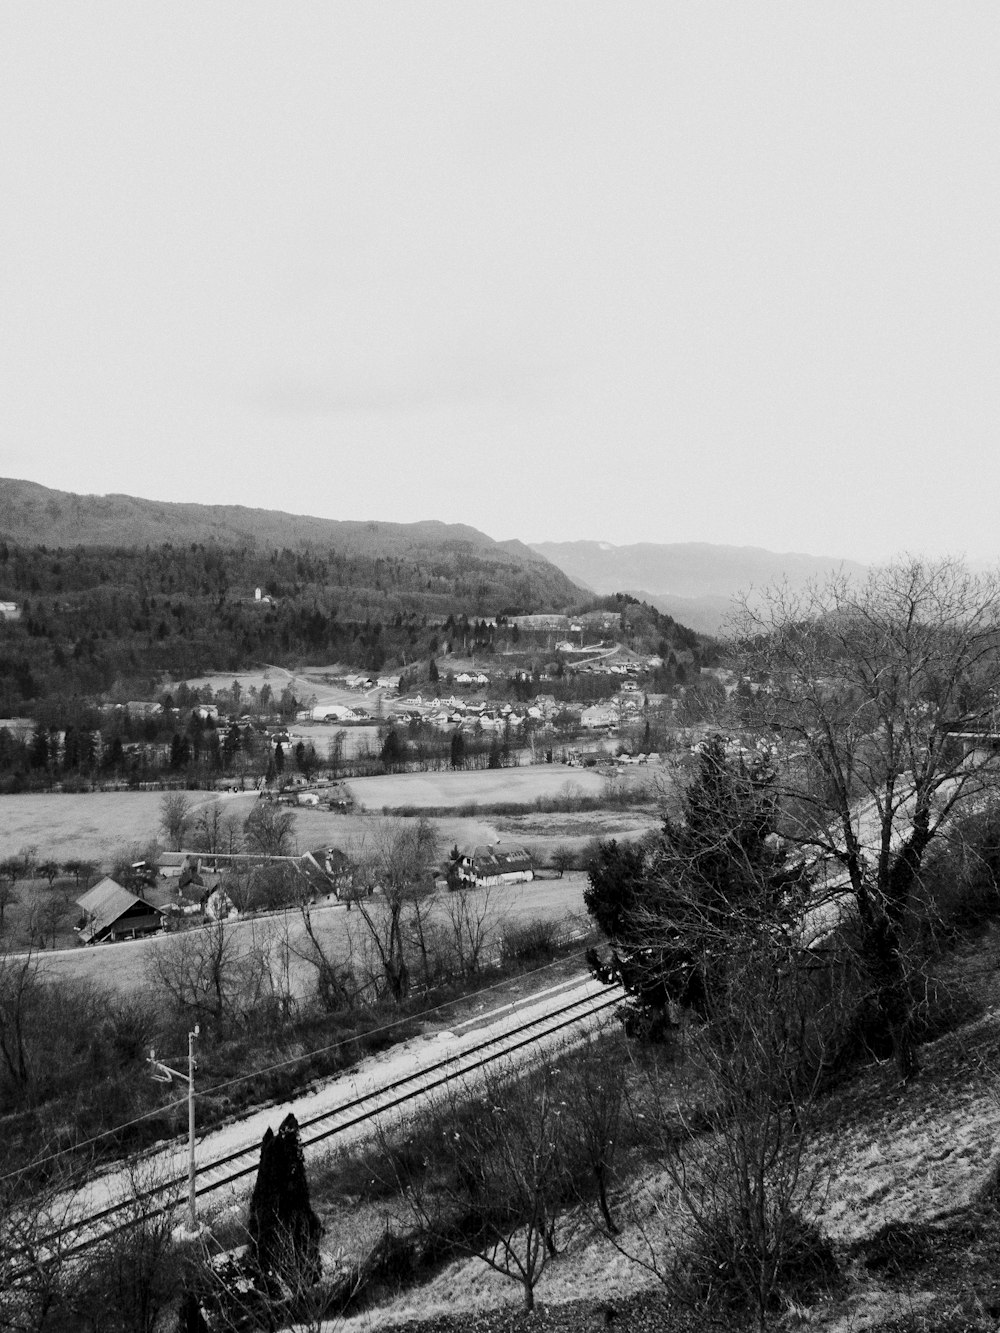 a black and white photo of a rural area